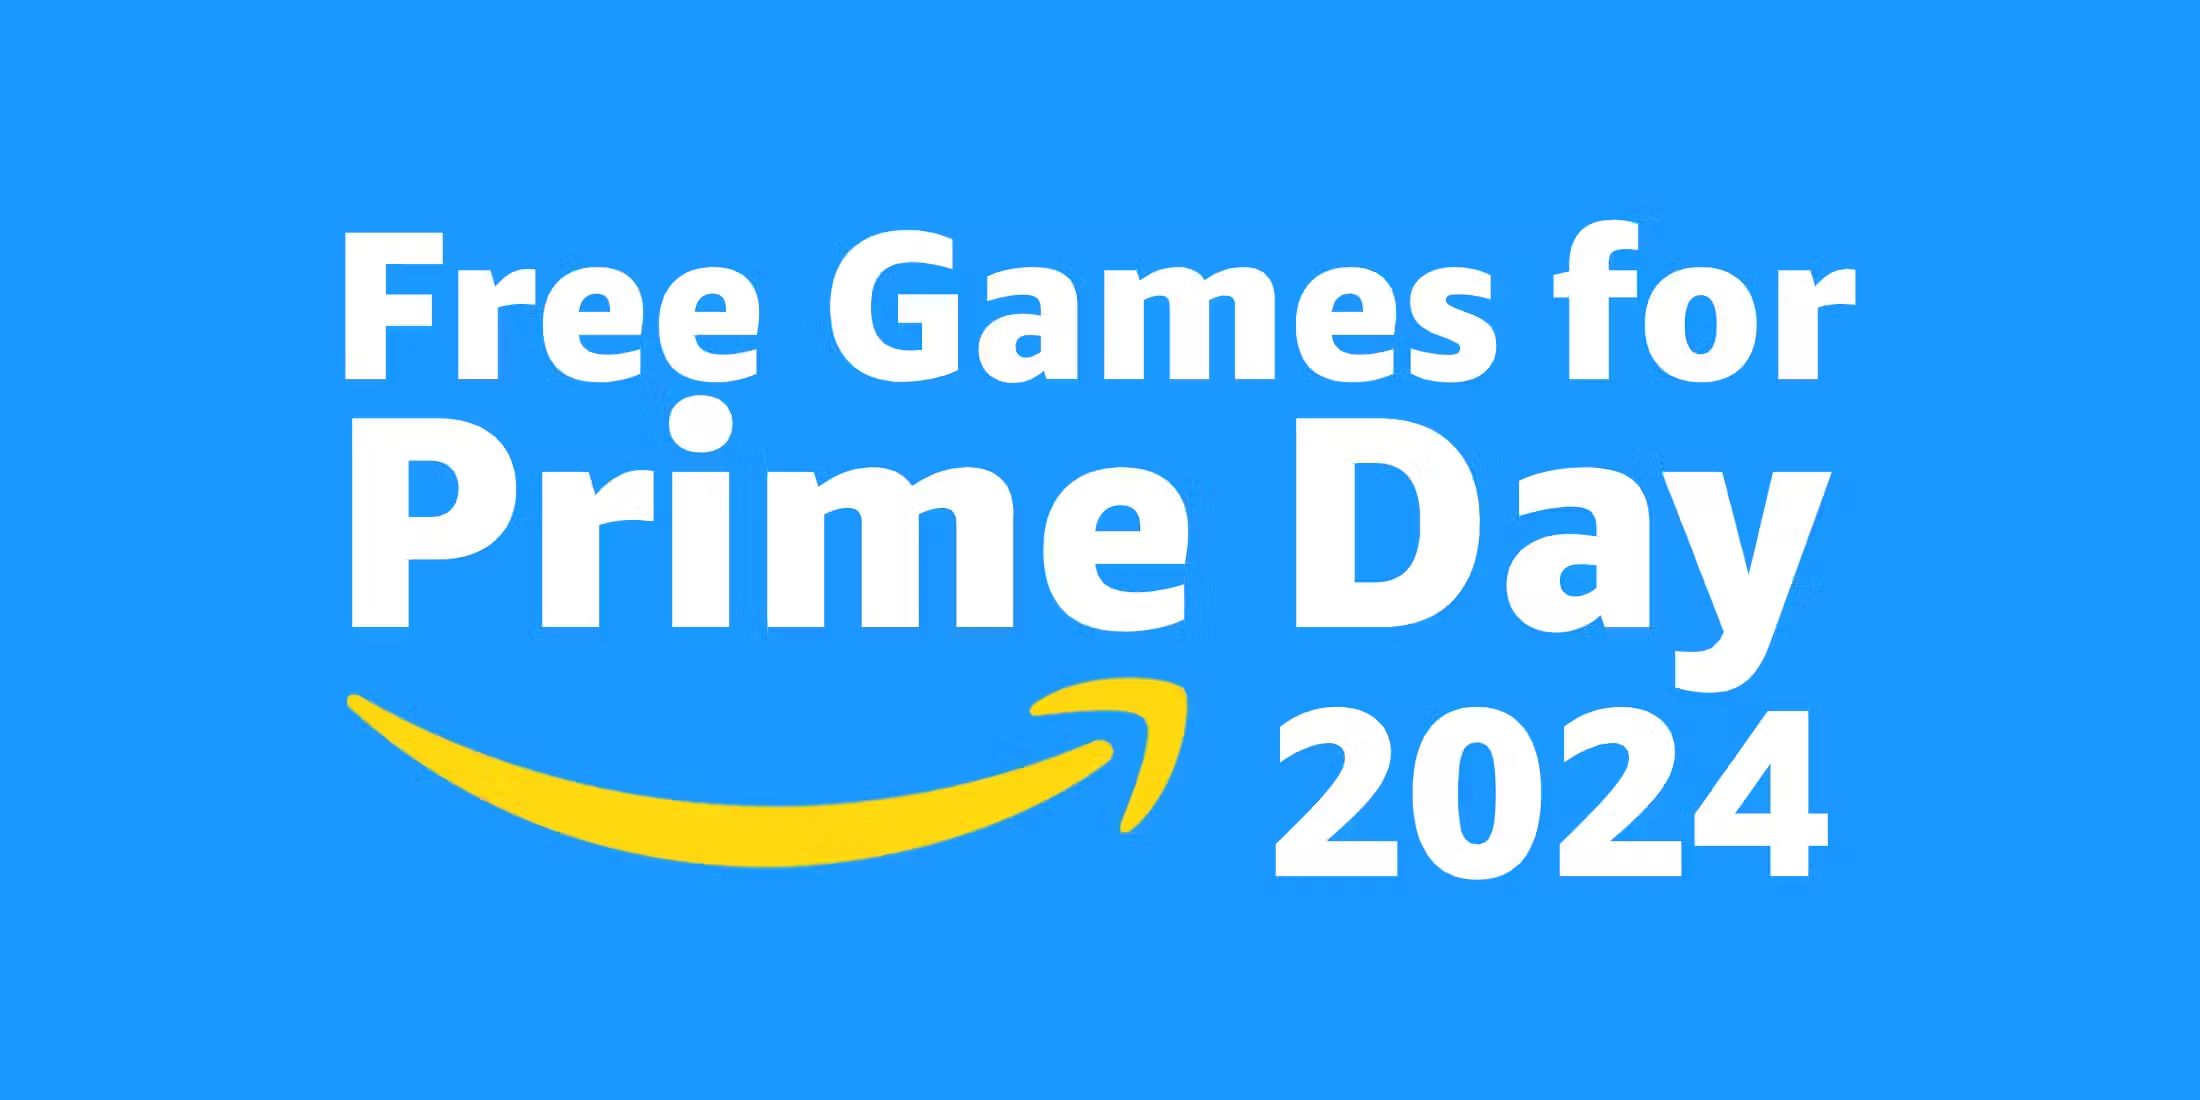 free-games-for-amazon-prime-day-2024-title-card-white-text-yellow-arrow-light-blue-background